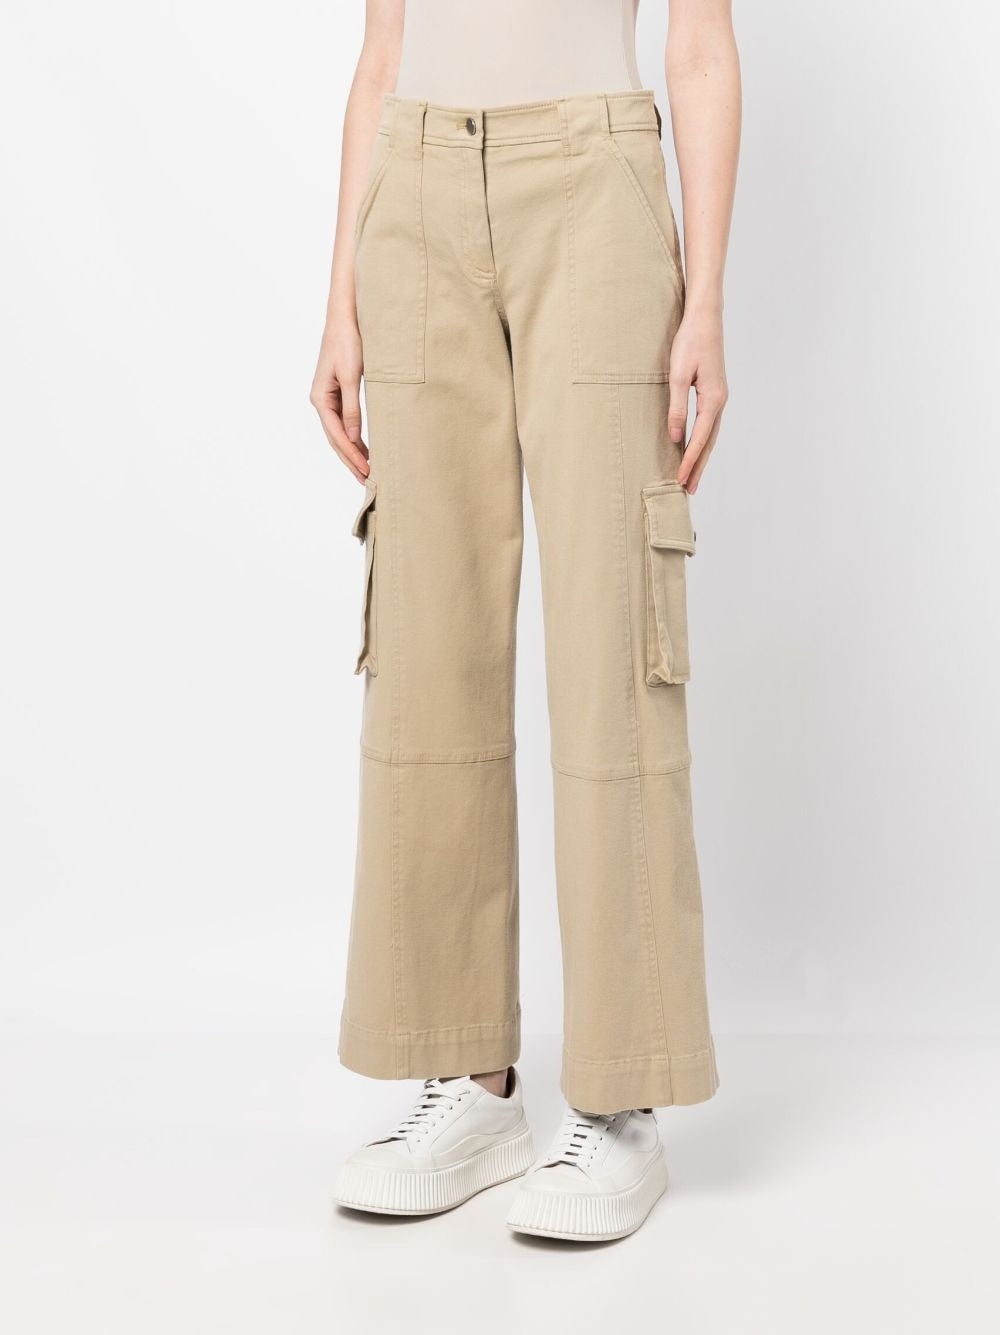 TWP Coop Cargo Pants (More Colors)